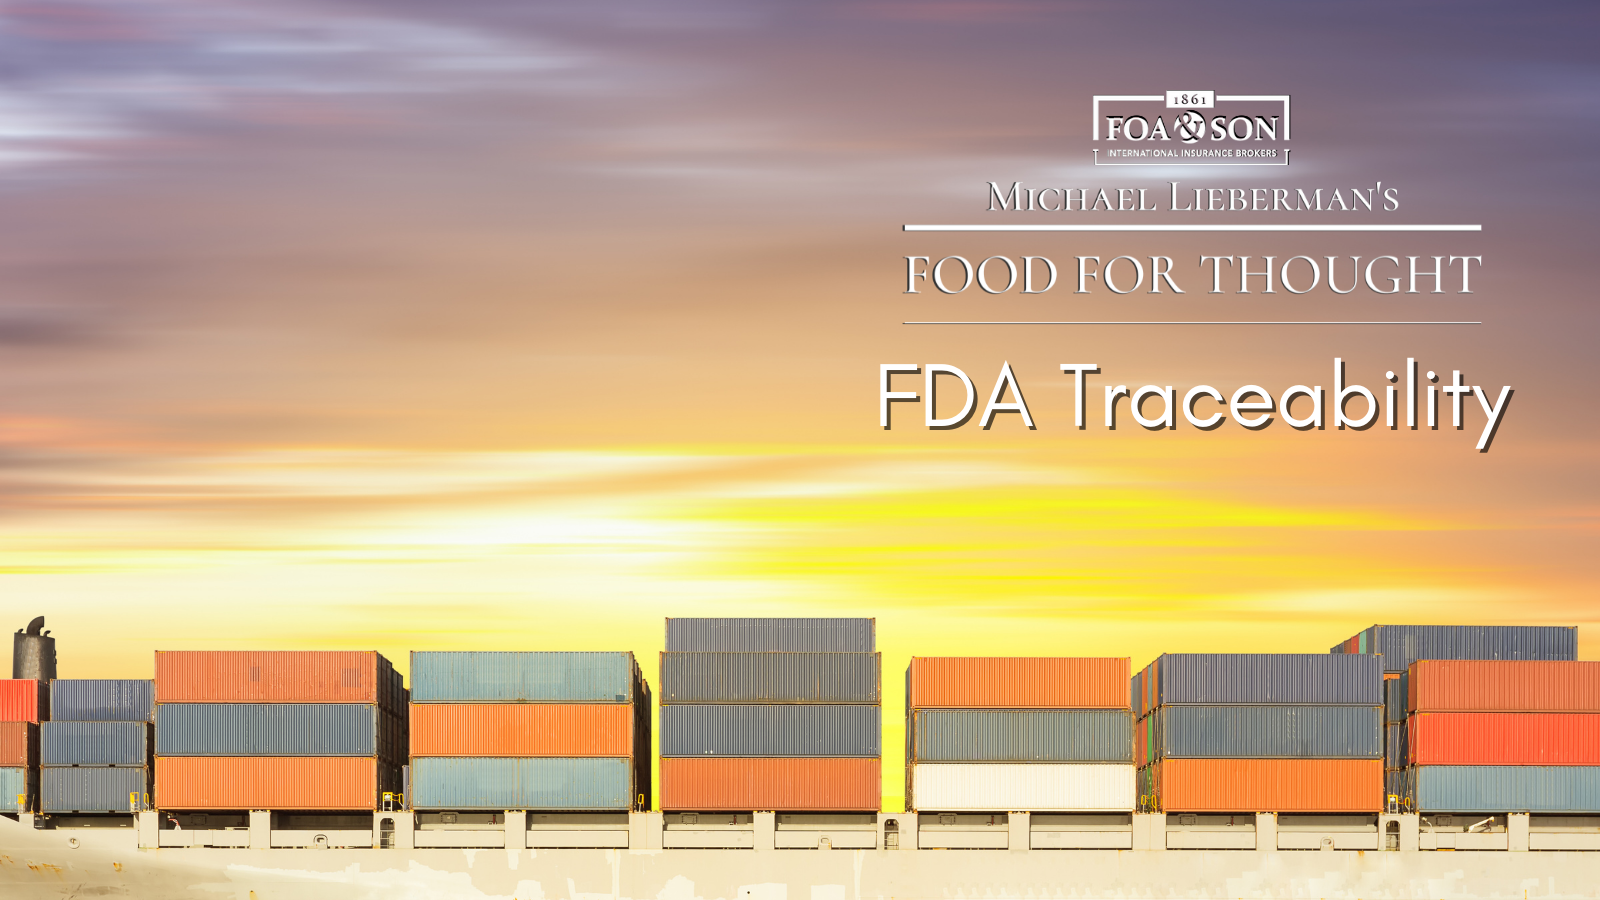 A graphic displaying cargo containers and entitled 'Michael Lieberman's Food for Thought: FDA Traceability'